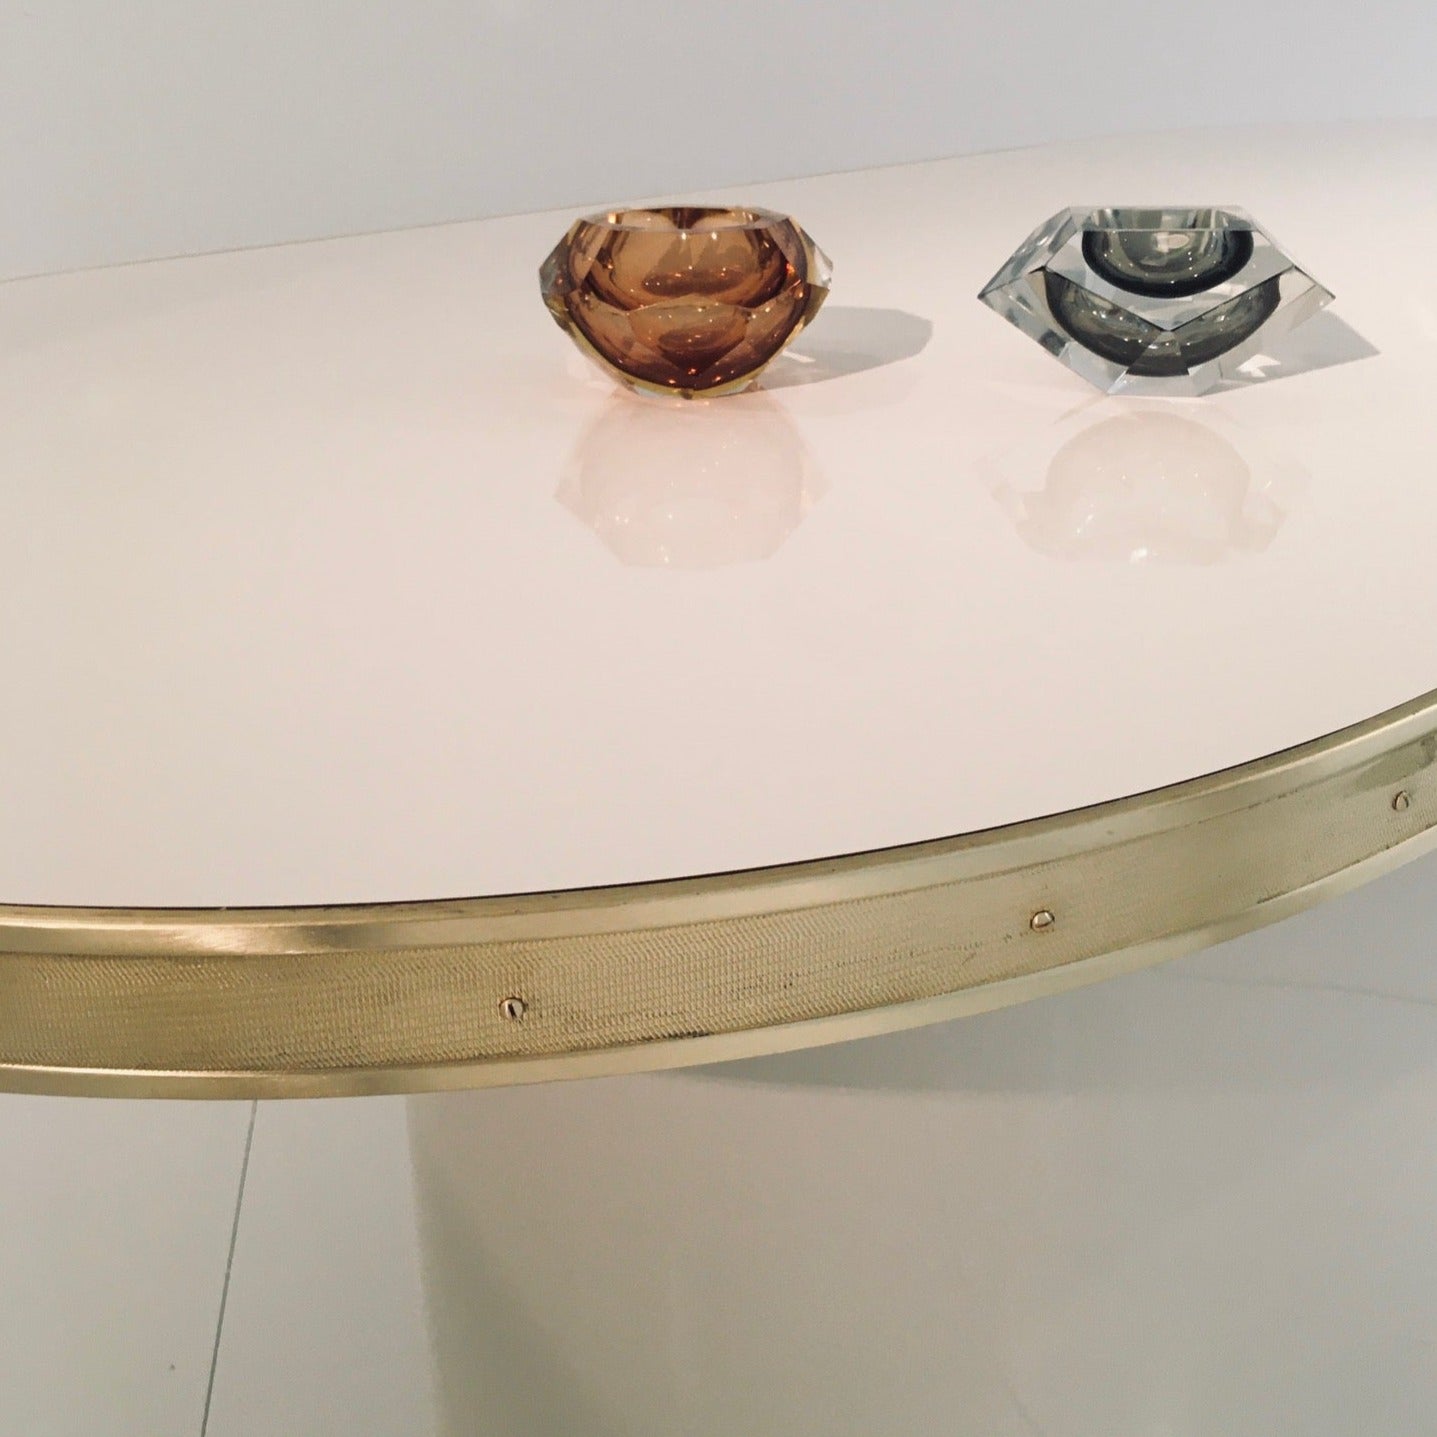 Julieta Console Table in High Gloss Laminate with Brass Details and Pedestal Leg